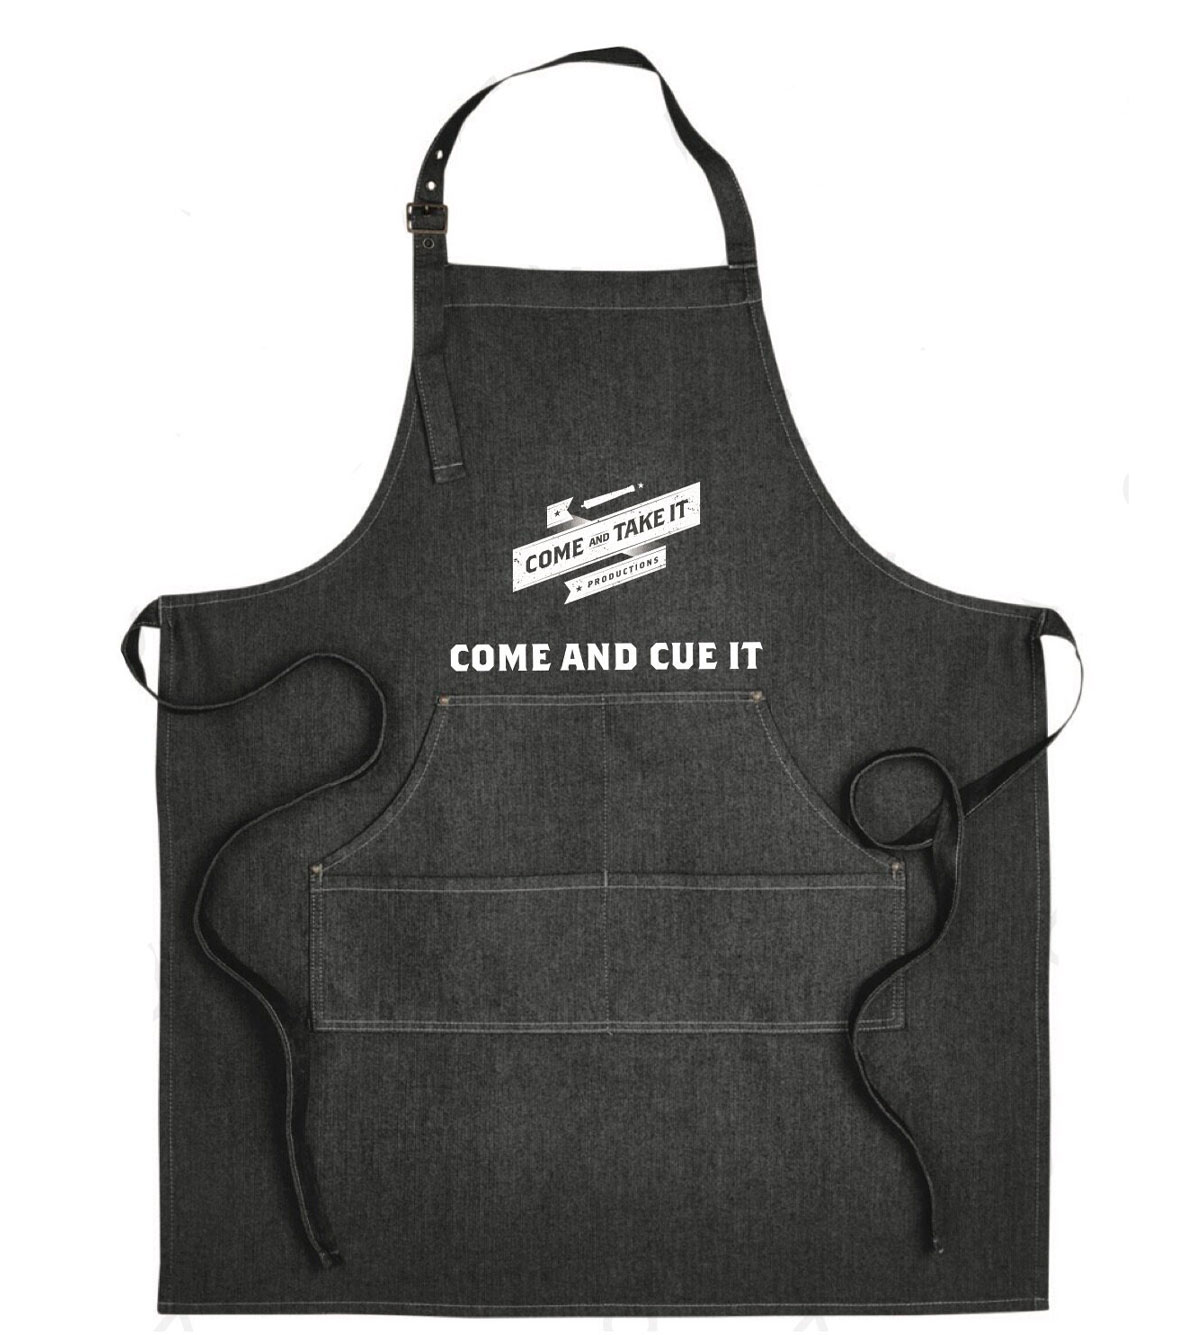 Come-and-Take-It-Productions-apron-v2